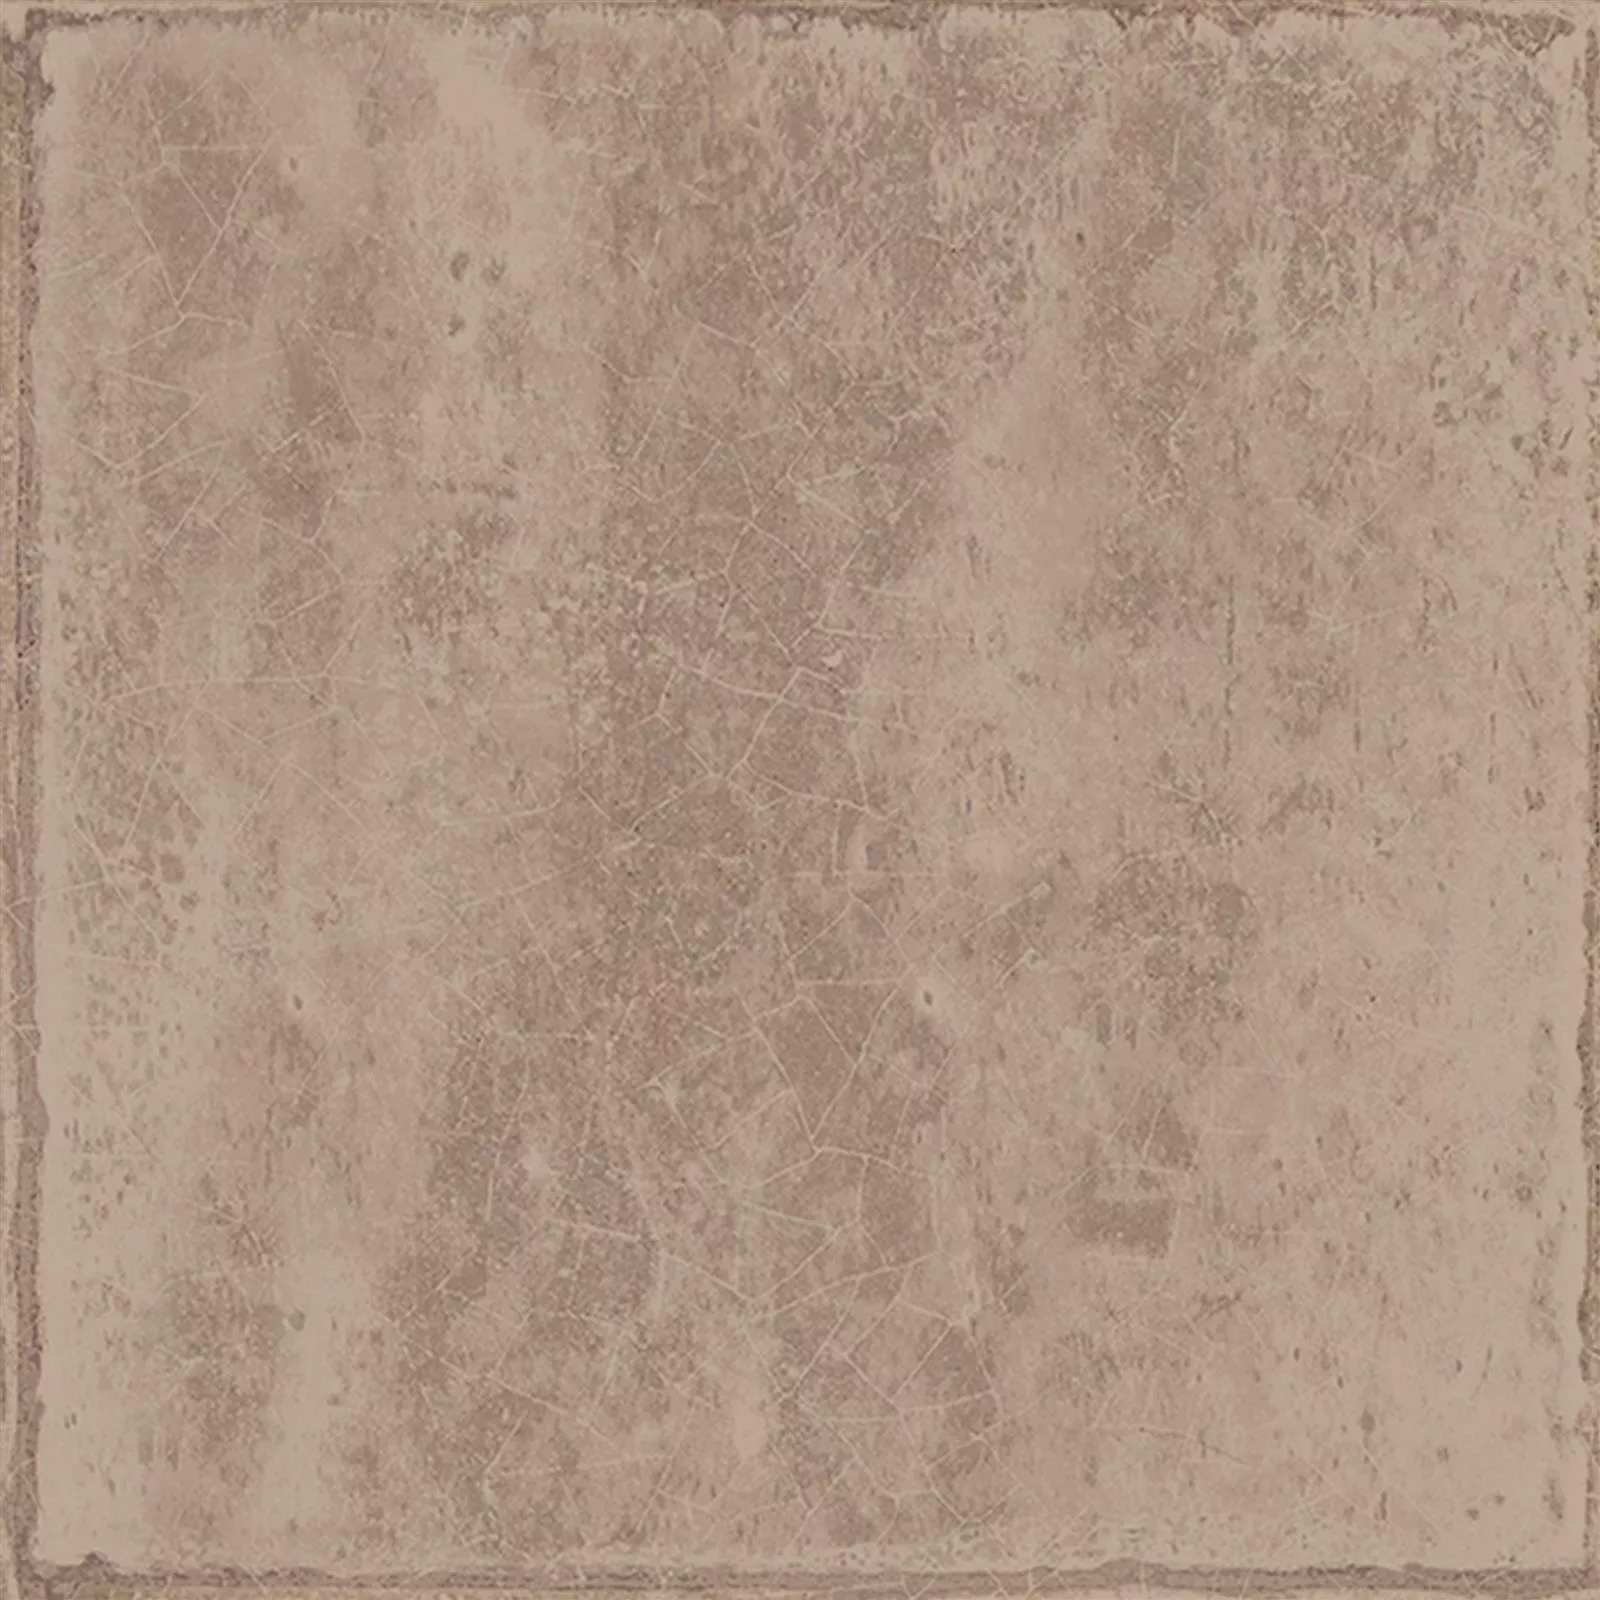 Sample Wall Tiles Maestro Waved Glossy Light Brown 15x15cm